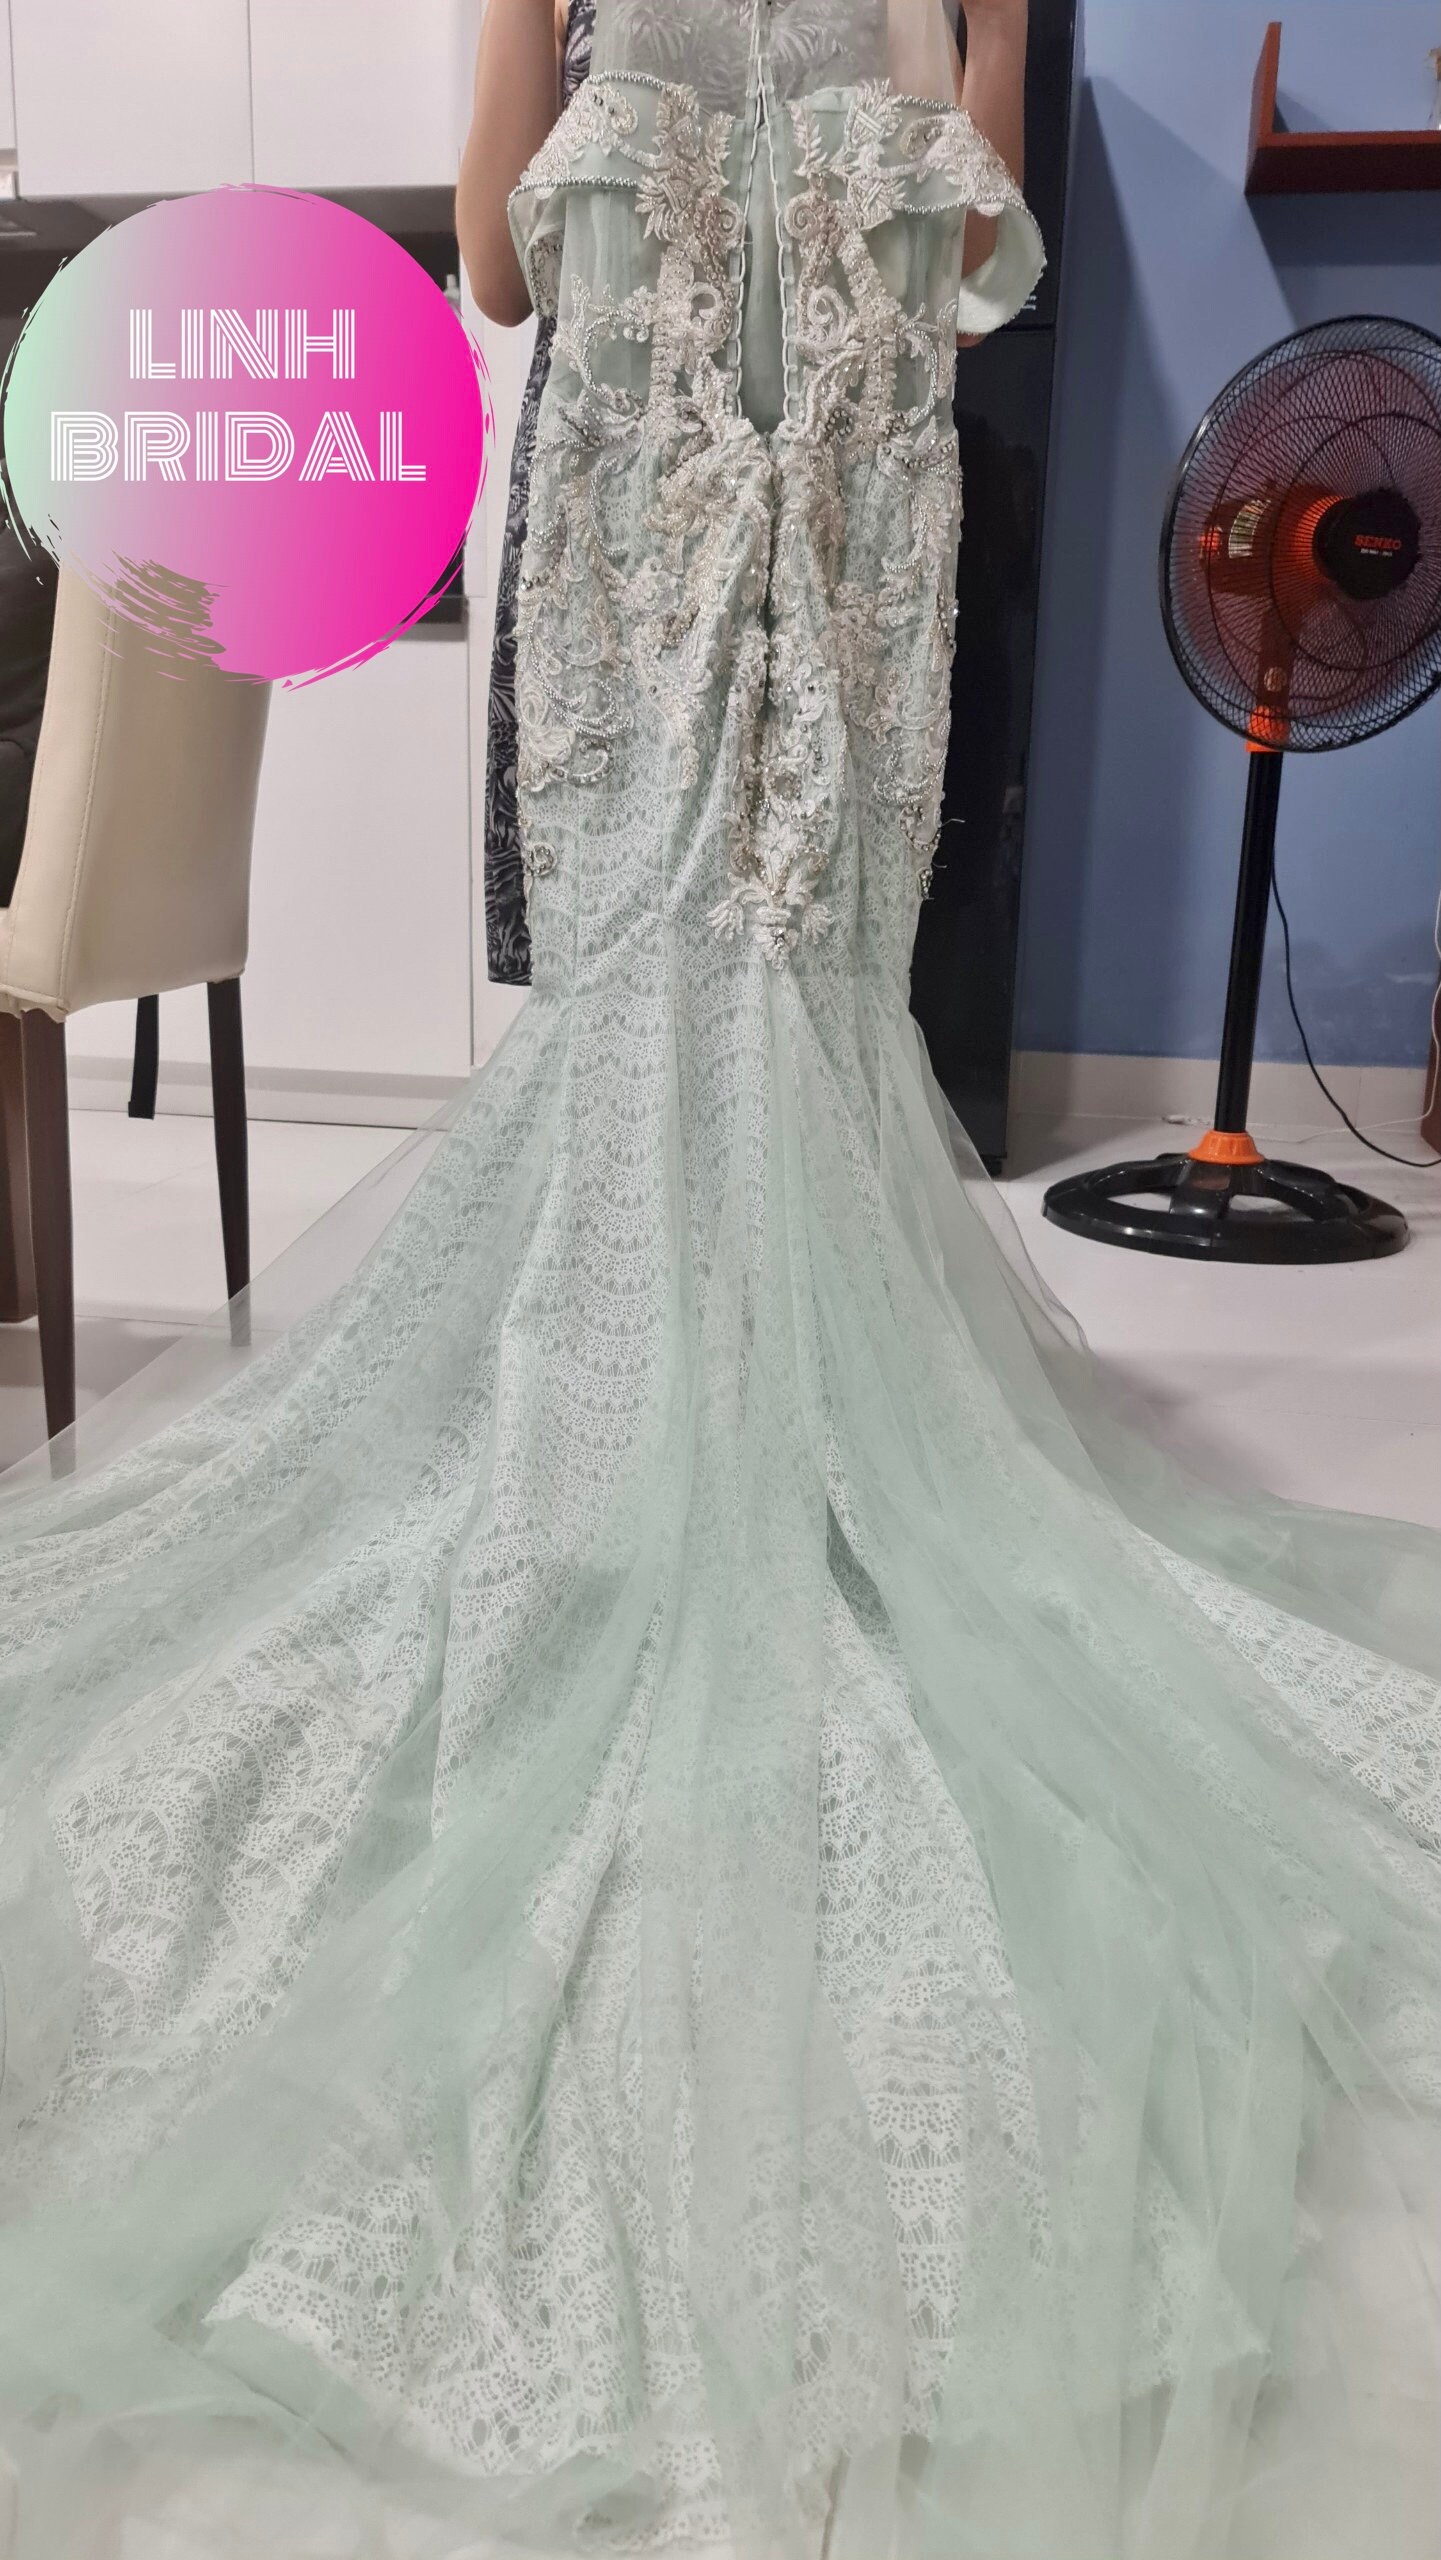 Various Styles Pastel Mint Green Floral Lace Ball Gown -  Israel